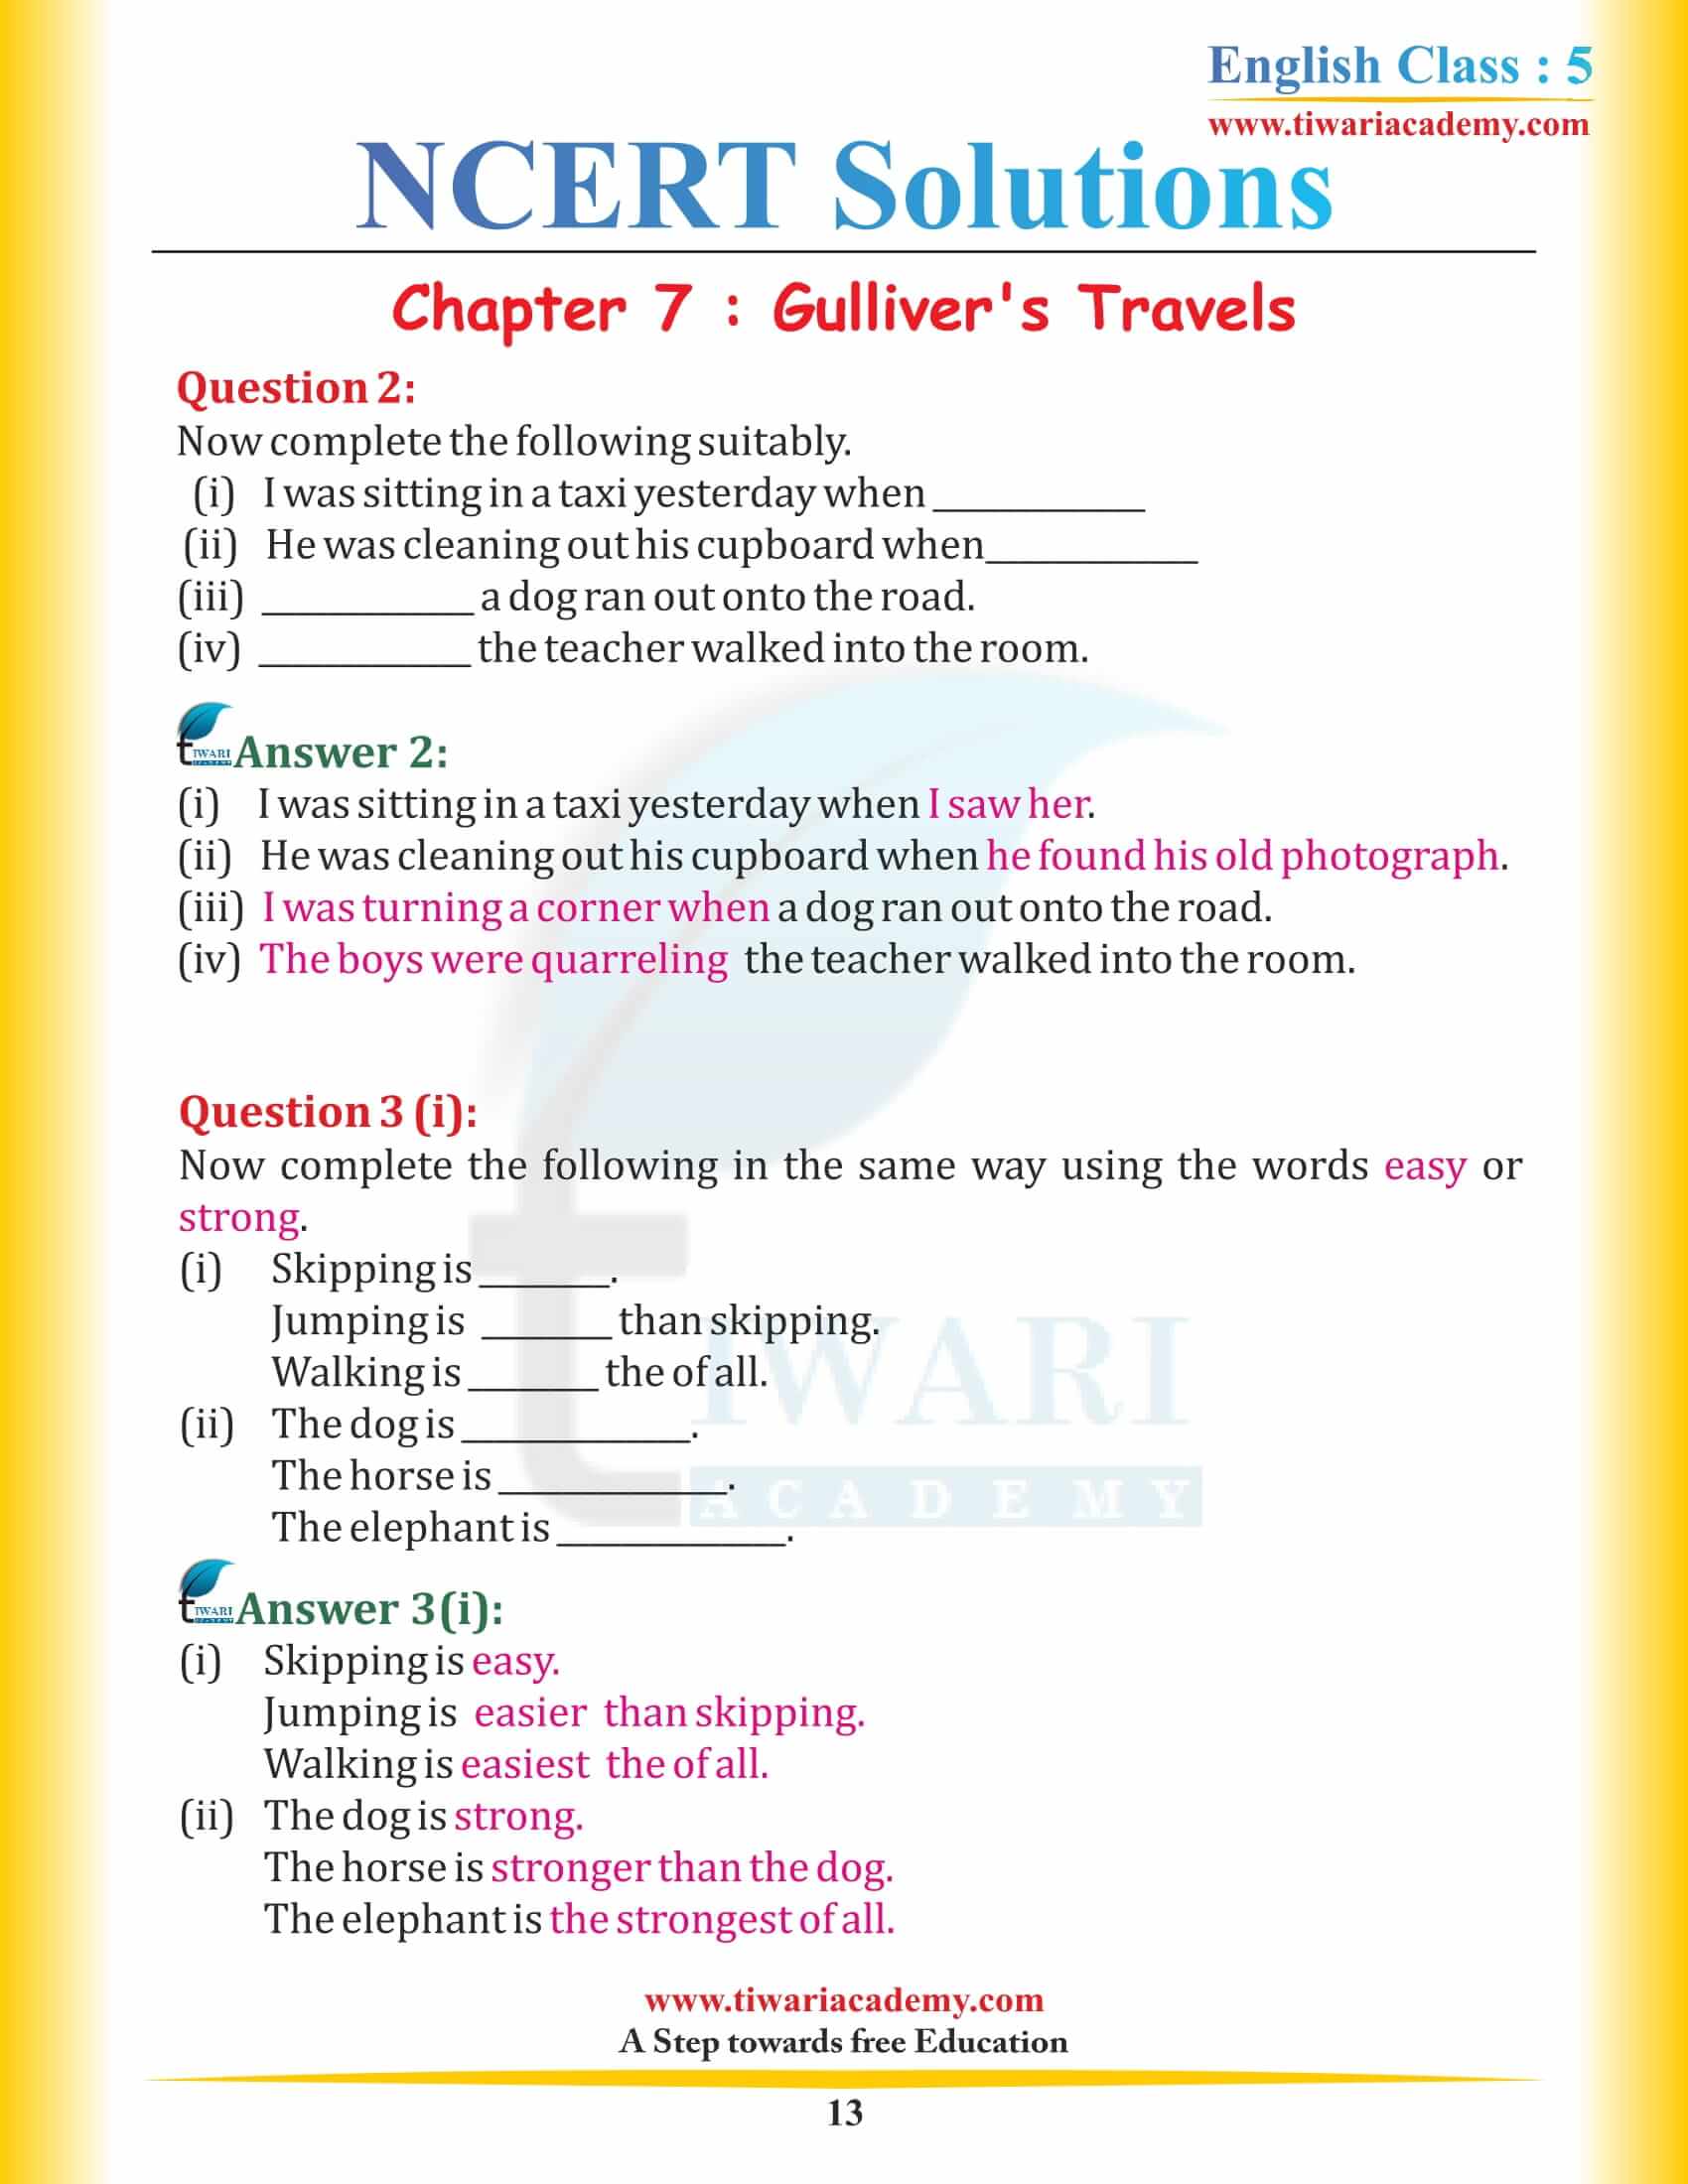 NCERT Solutions for Class 5 English Chapter 7